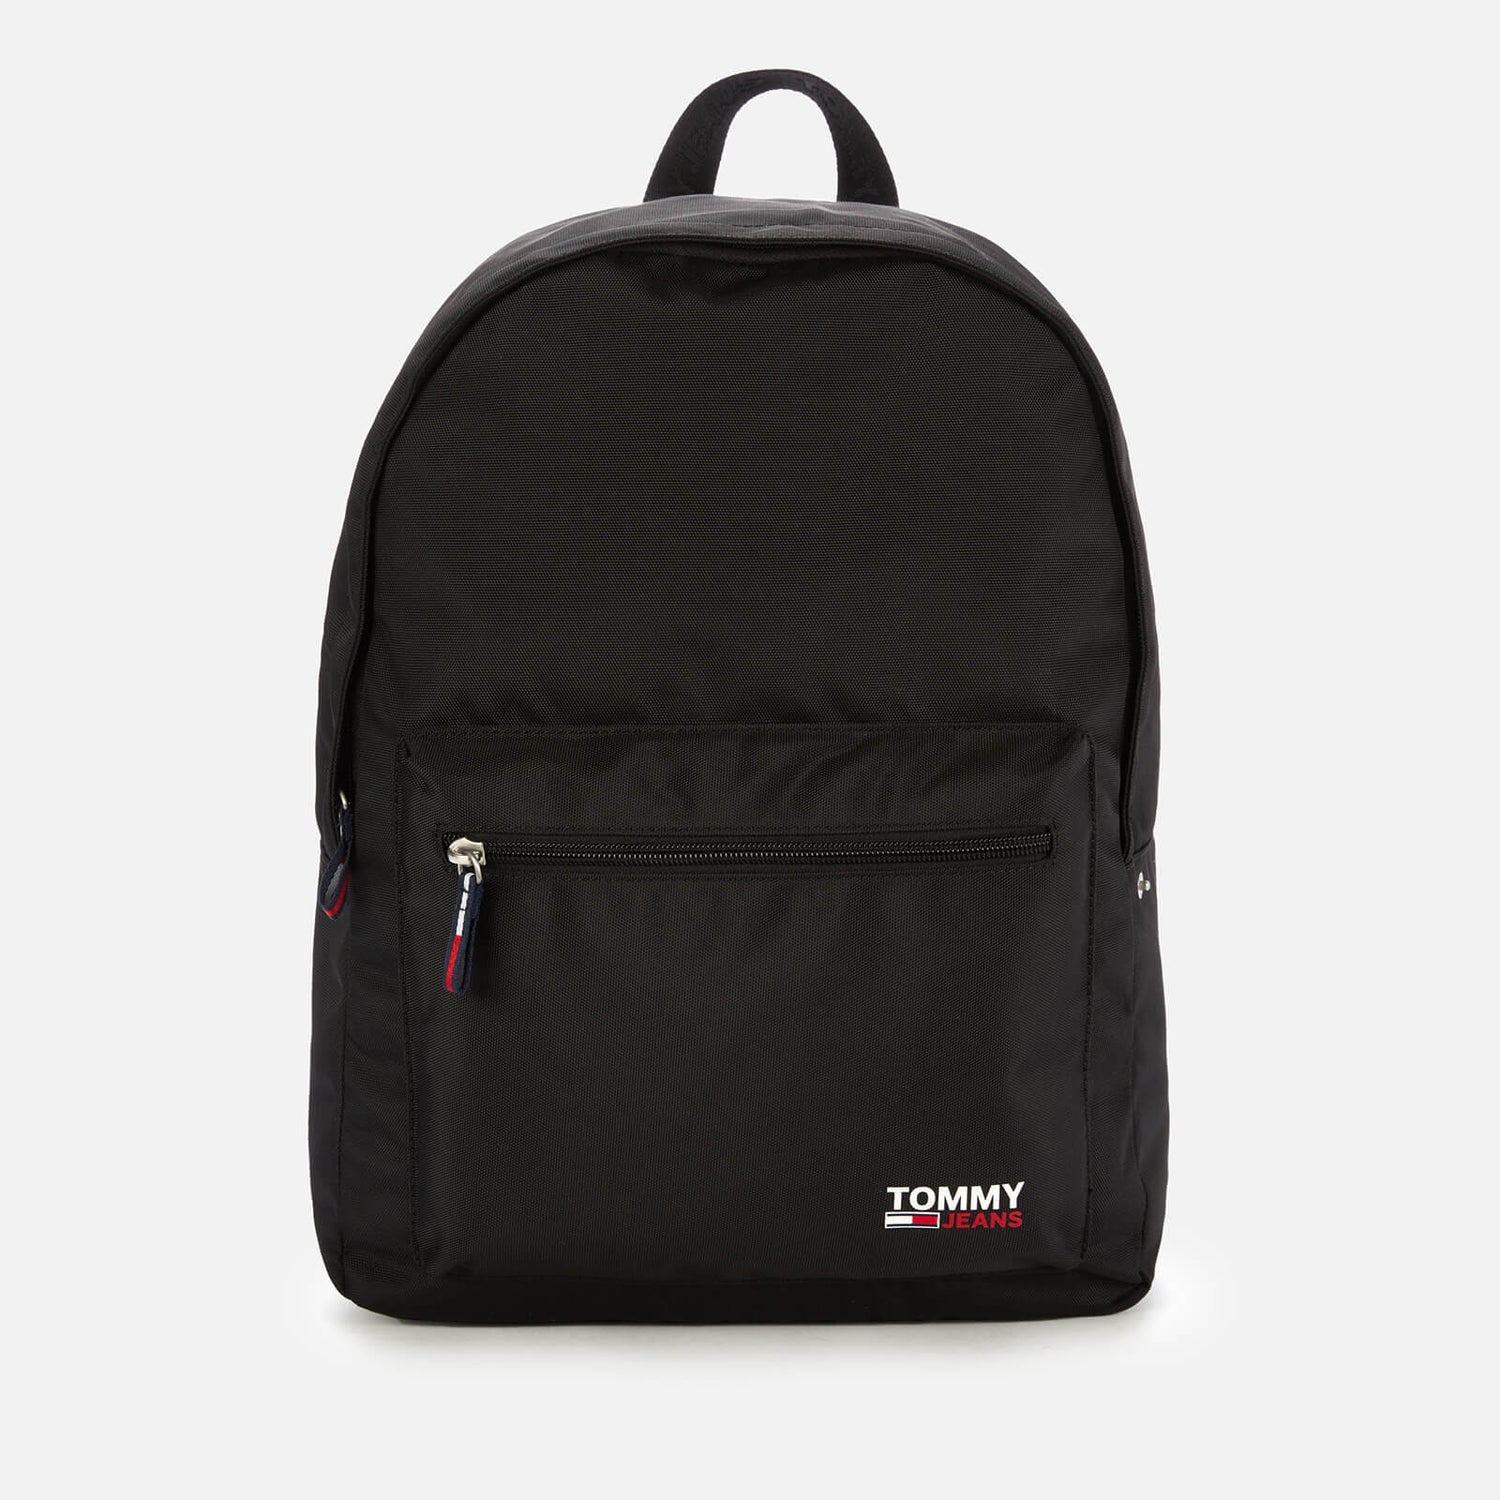 Tommy Jeans Women's Tjw Campus Backpack - Black